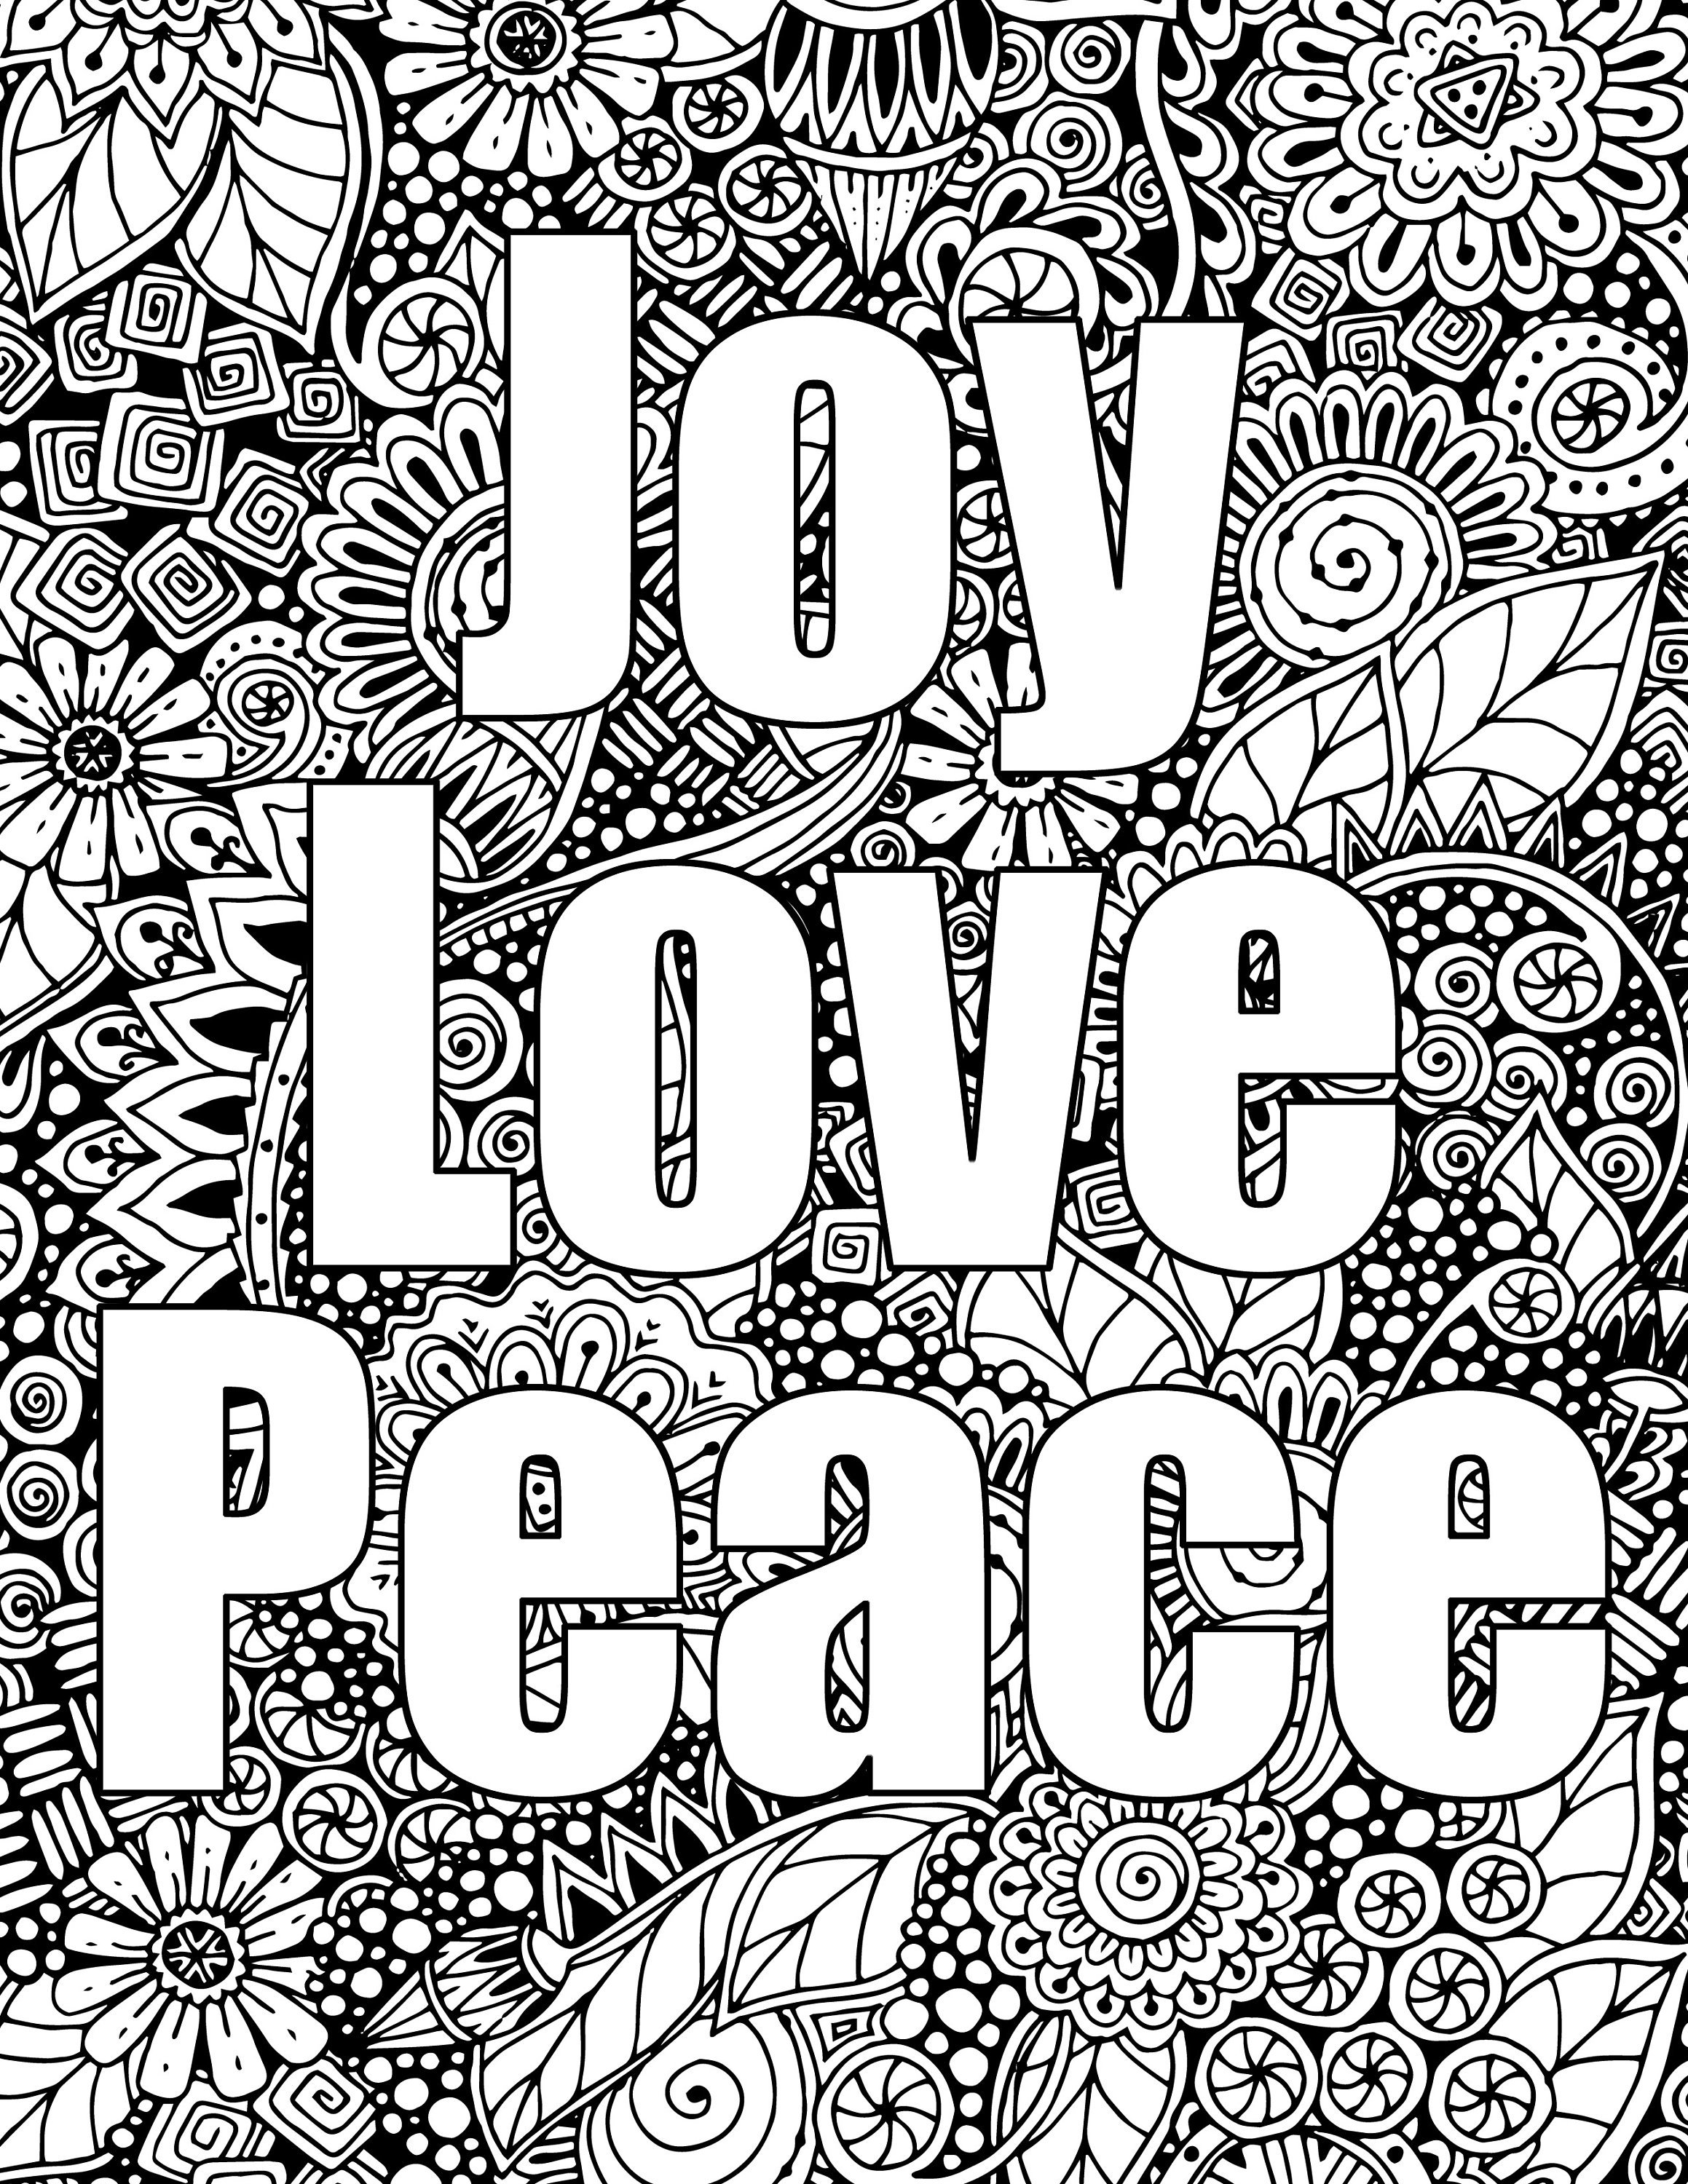 Joylovepeace coloring pages for adults printable coloring page instant download pdf